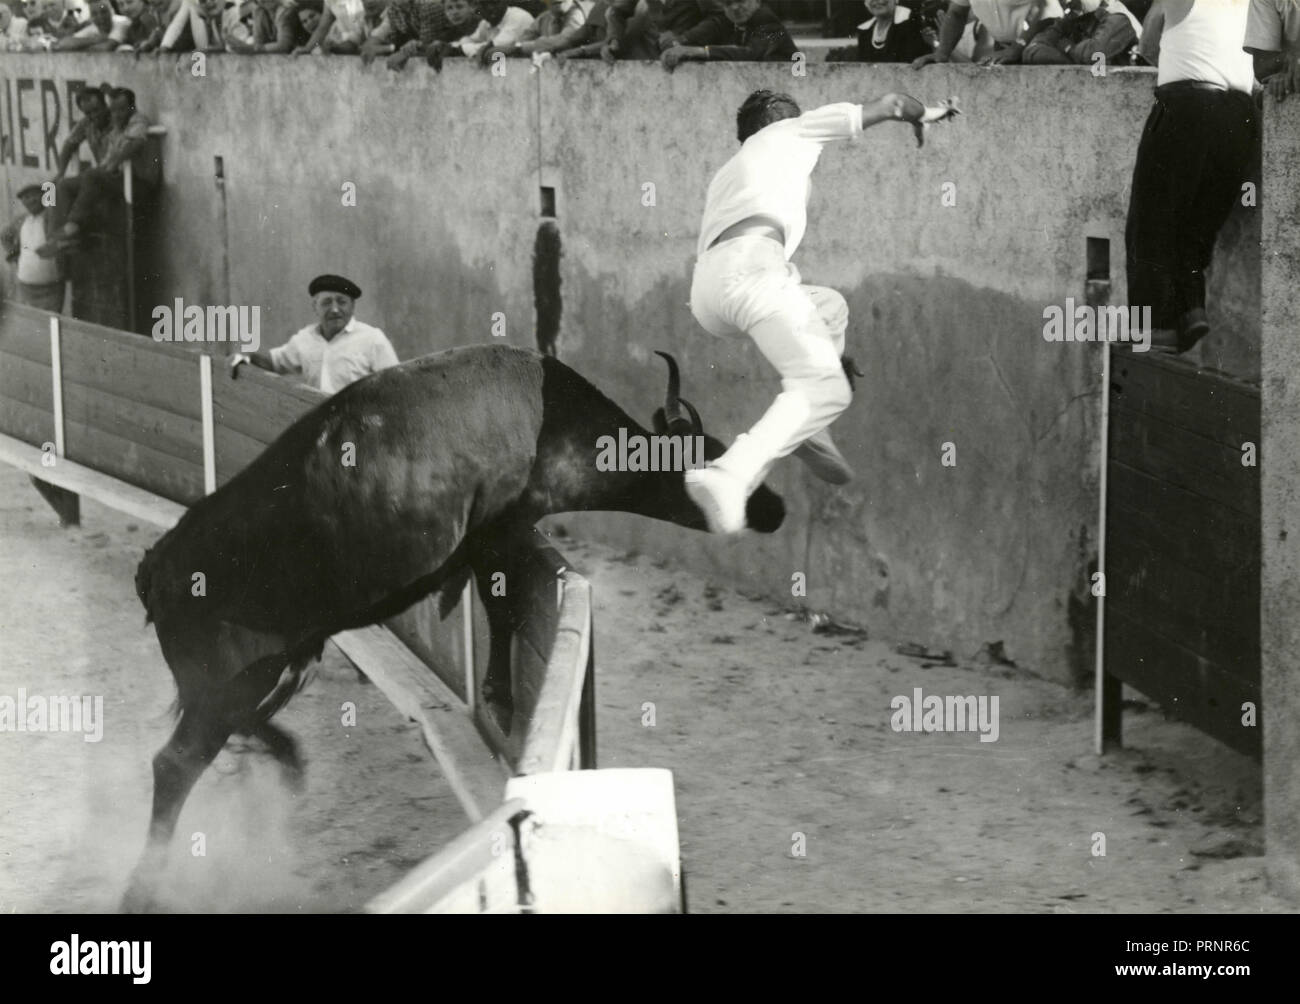 Raging bull with jumping man, 1950s Stock Photo